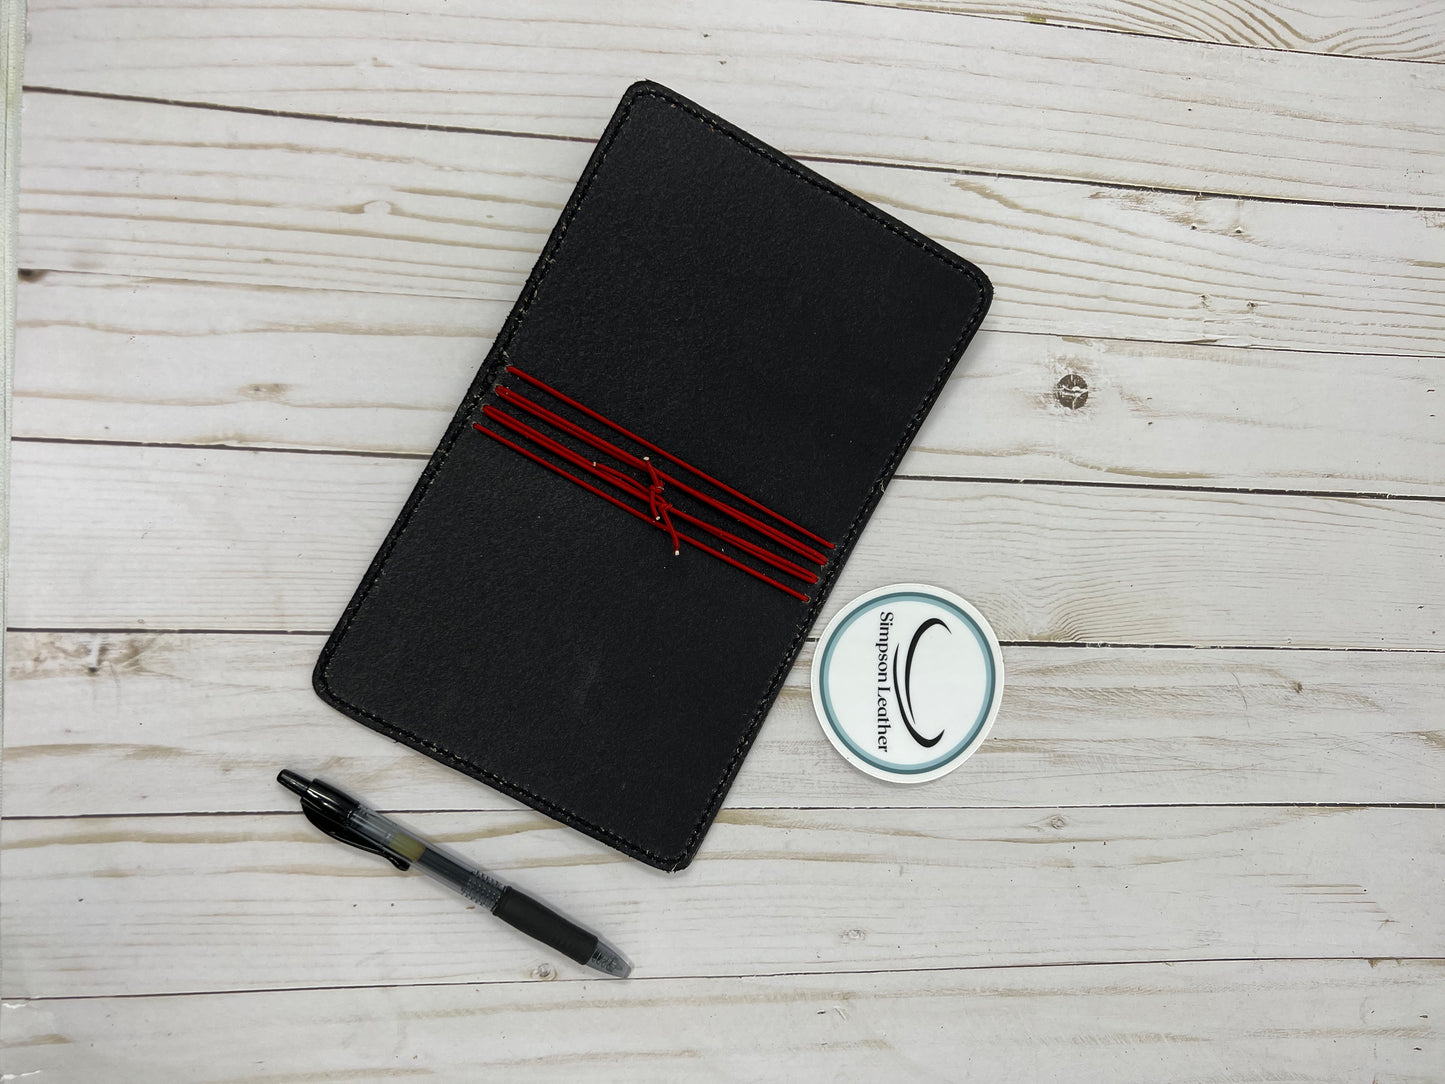 Pocket Plus Leather Traveler’s Notebook, Ebony Harness,  for 3.5” x 5.5” inserts (not included)